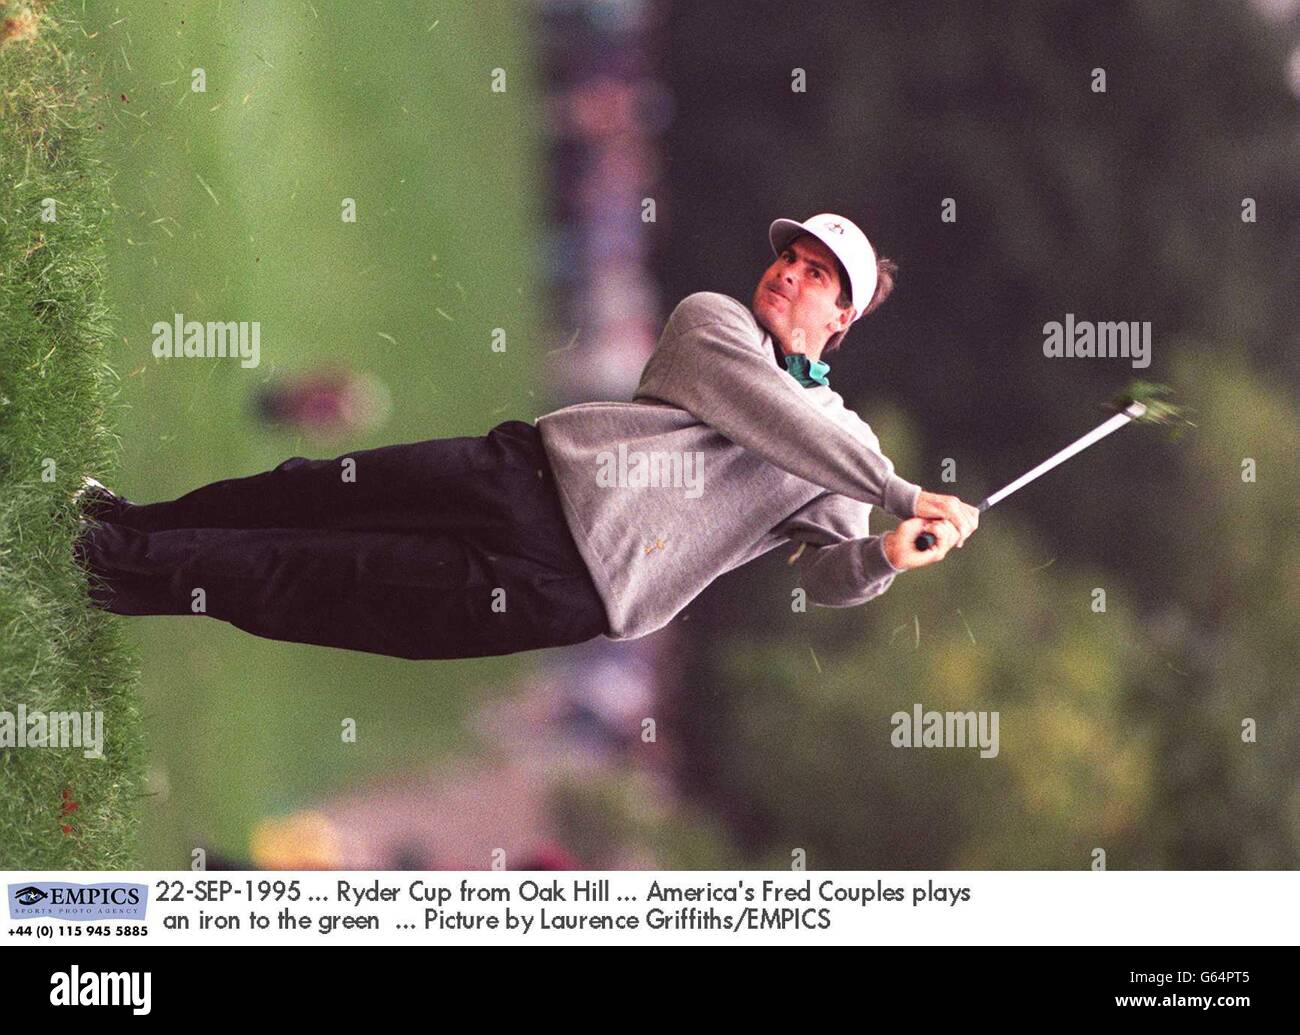 22-SEP-1995. Ryder Cup from Oak Hill. America's Fred Couples plays an iron to the green. Picture by Laurence Griffiths/EMPICS Stock Photo